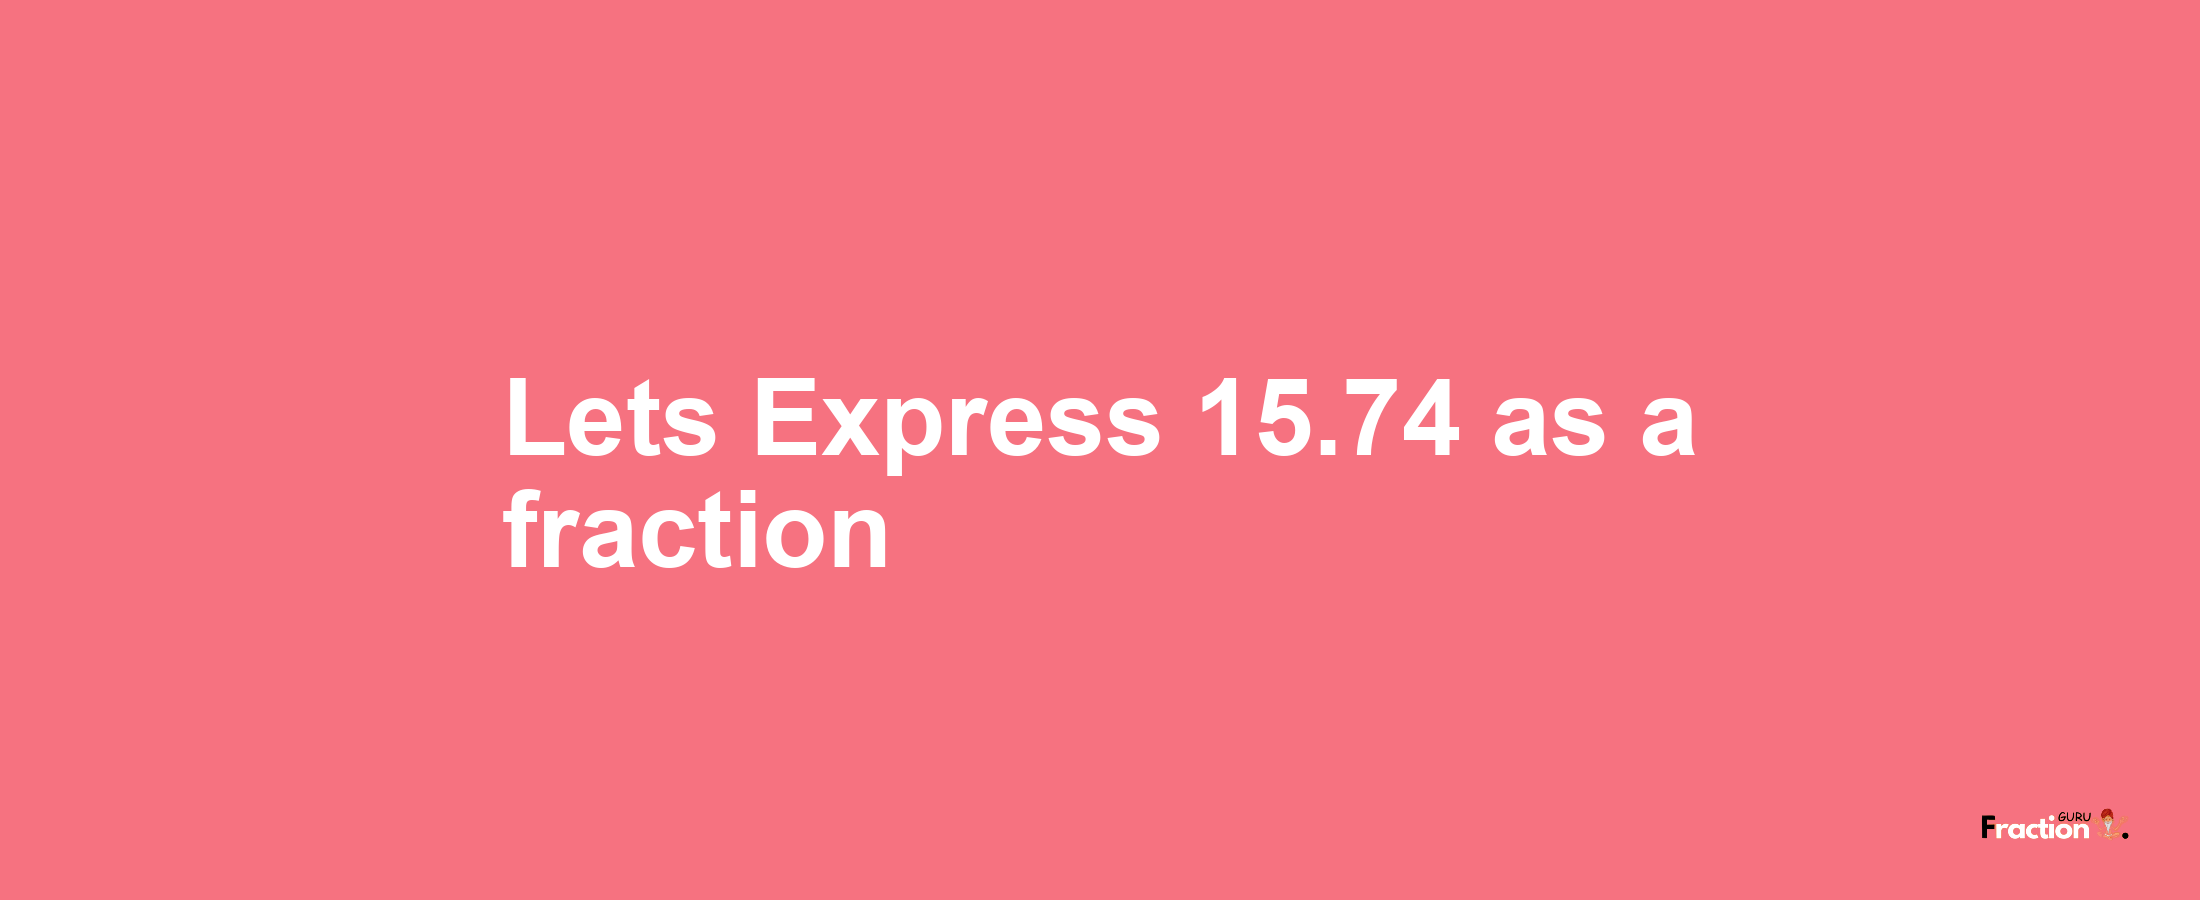 Lets Express 15.74 as afraction